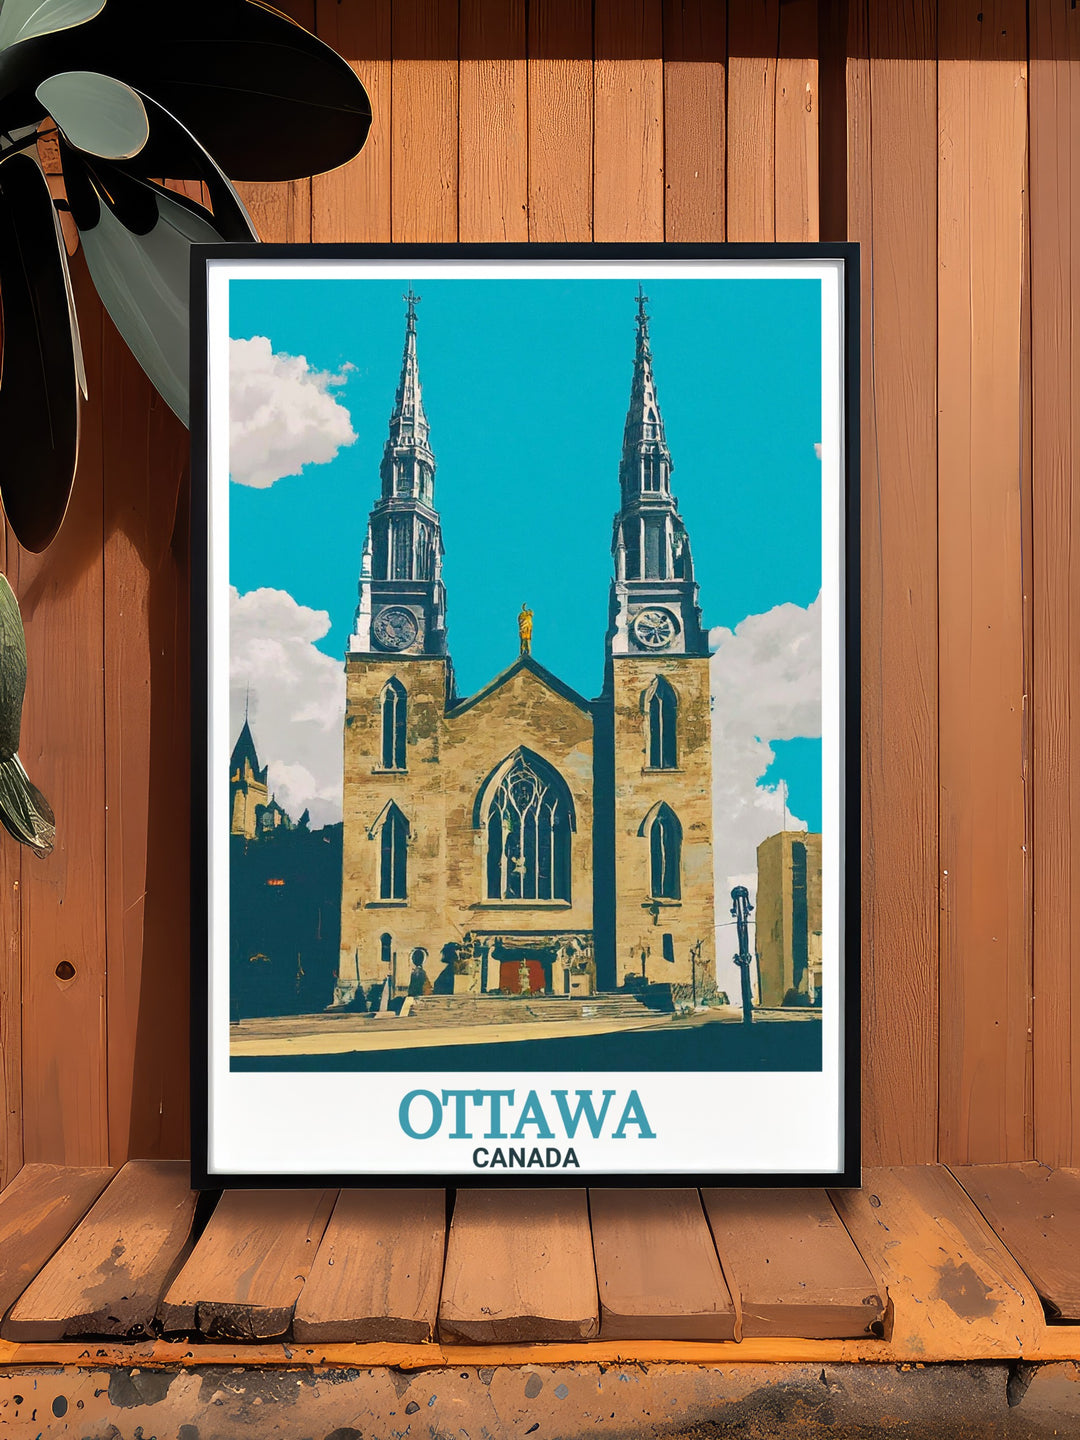 Notre Dame Cathedral Basilica wall art featuring a detailed painting of Ottawas famous cathedral. This beautiful artwork captures the intricate details of the basilica and offers a unique perspective on Ottawas cultural heritage. Perfect for enhancing any living space.